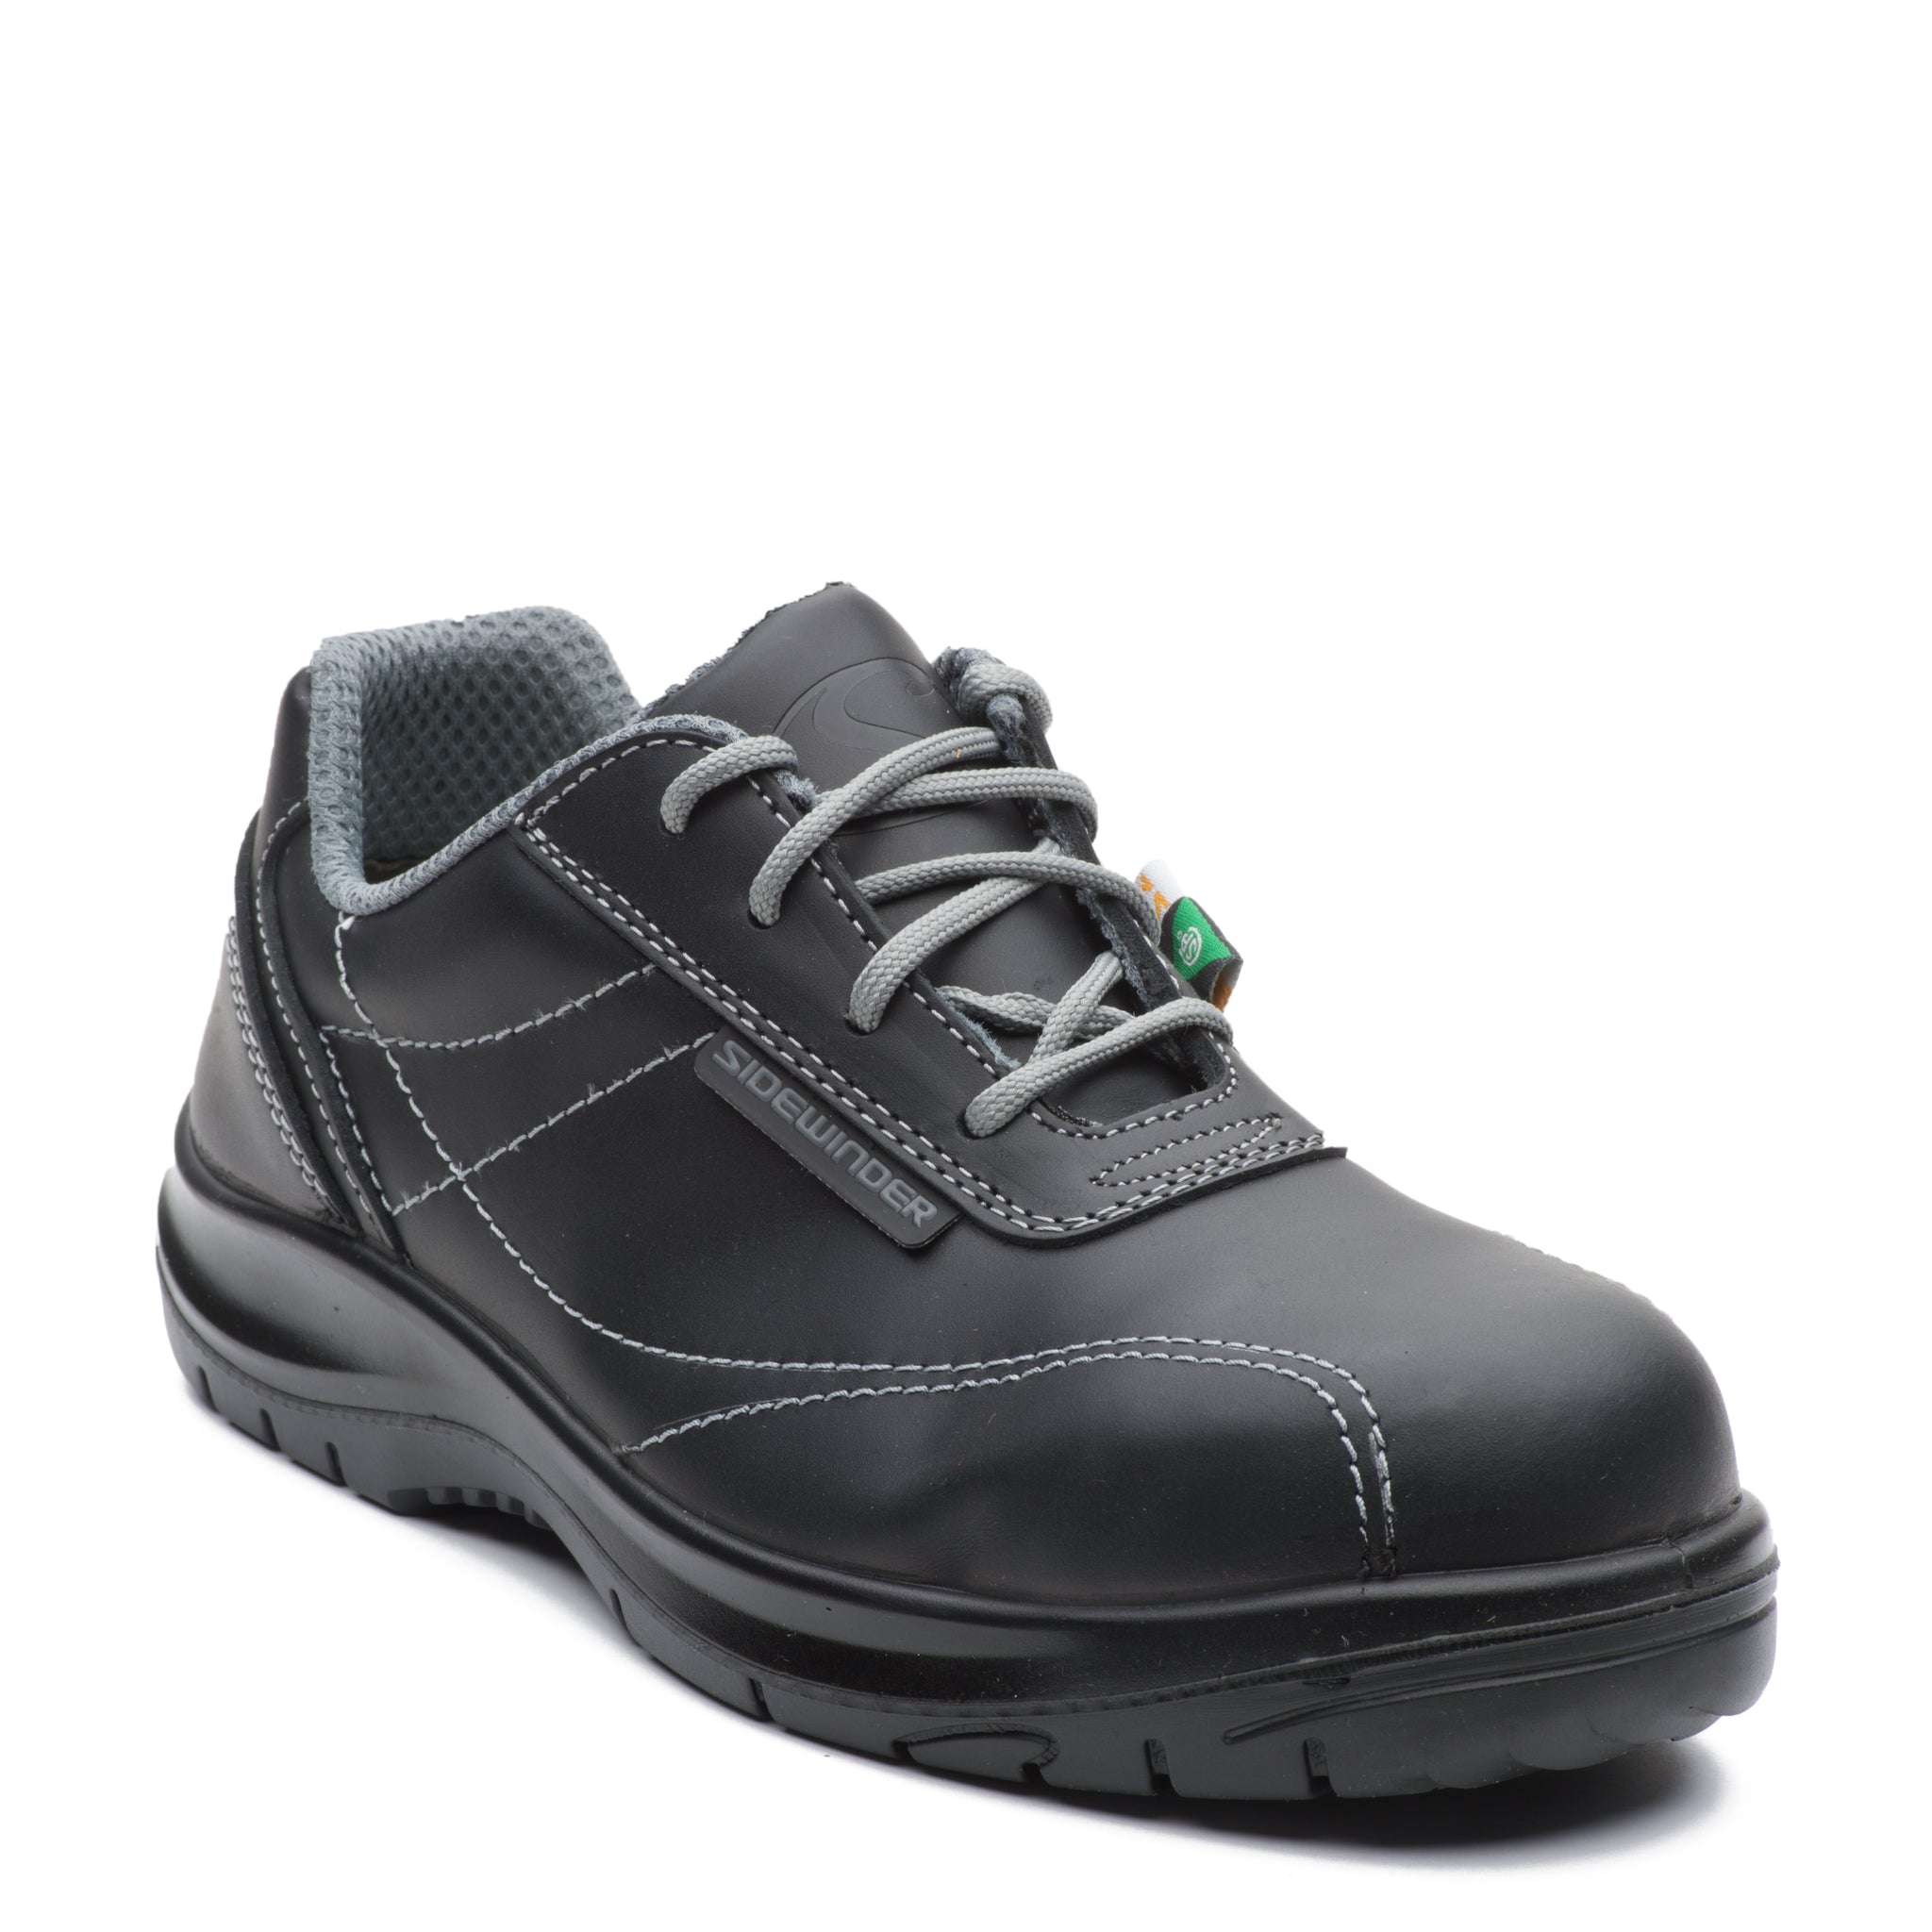 Quality Safety Shoes: durable, metal 